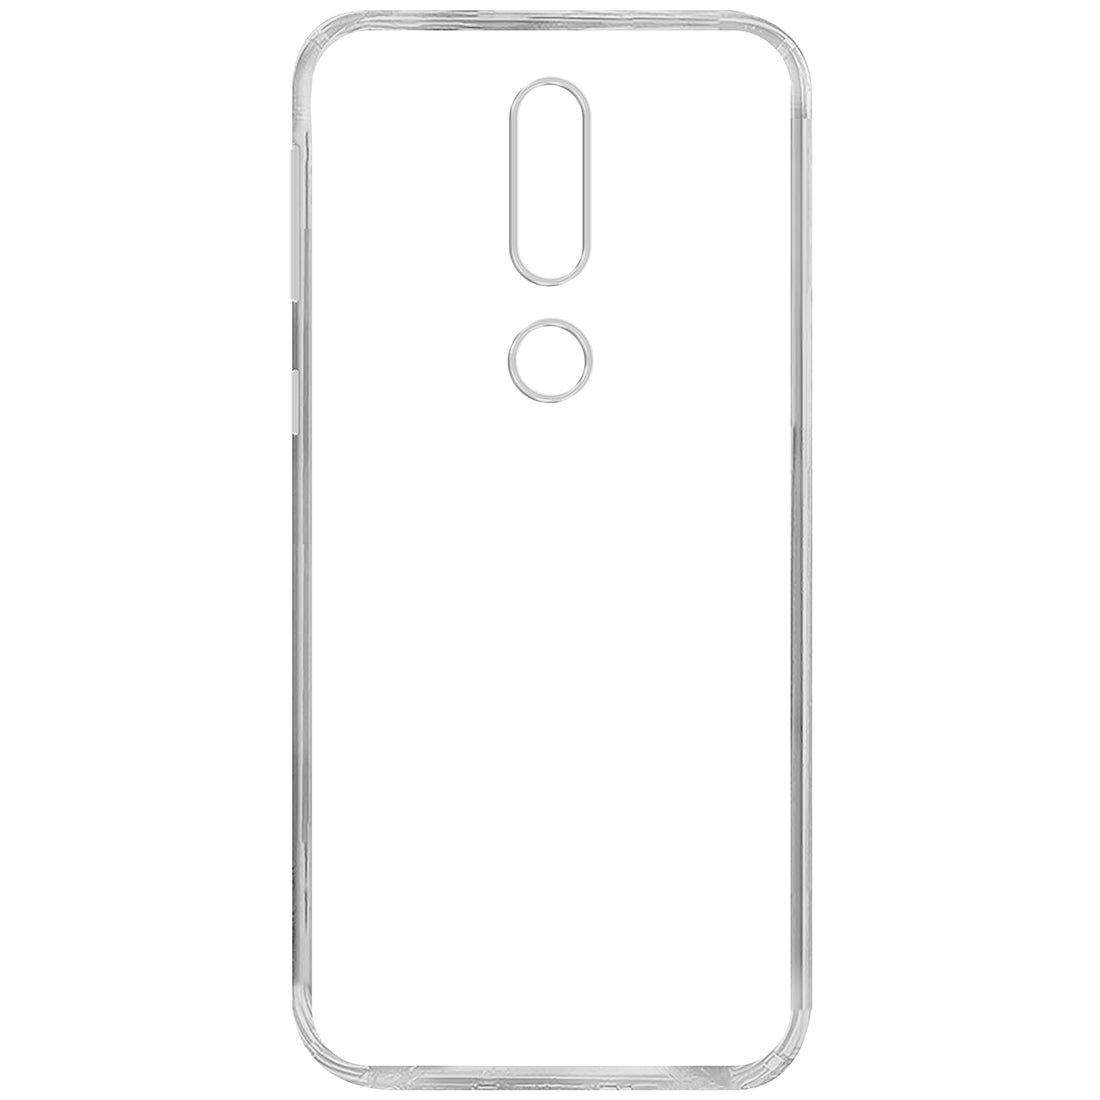 Clear Case for Nokia 7.1